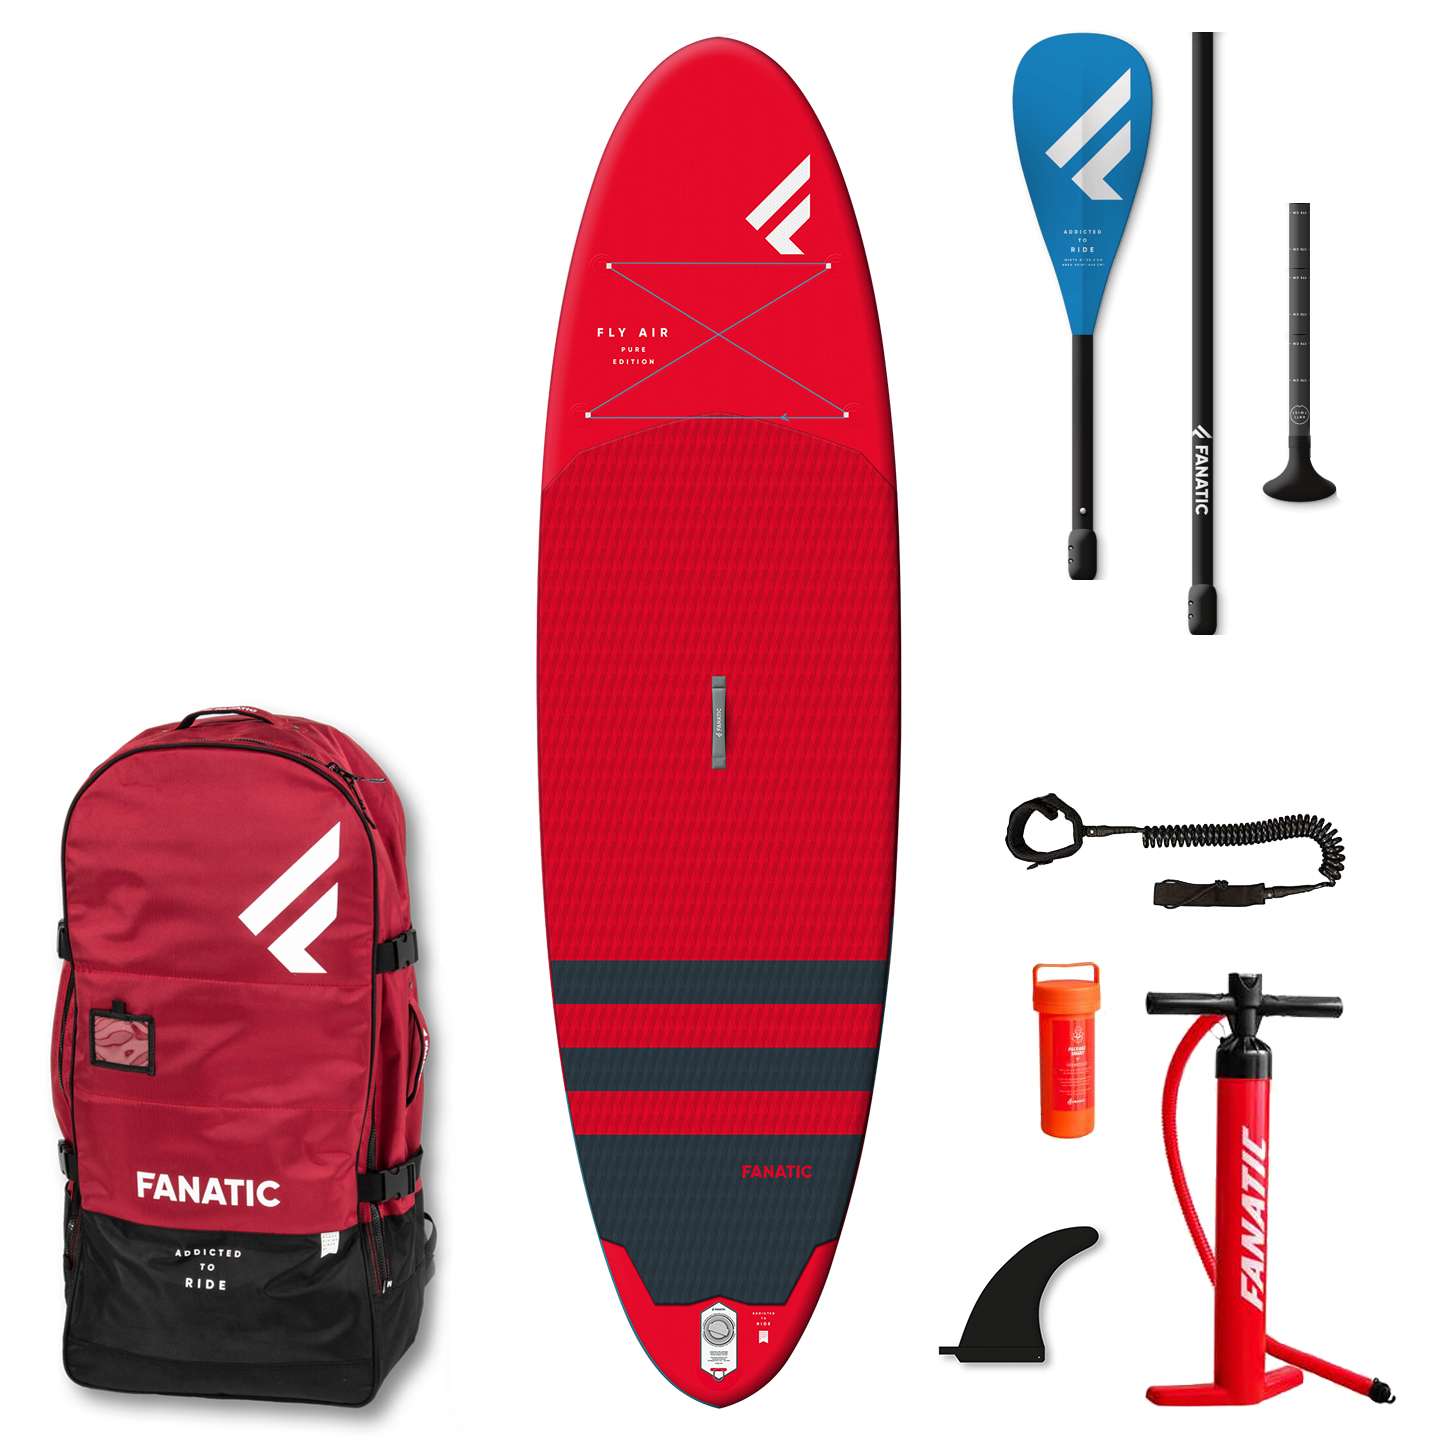 Fanatic Fly Air 10'8 Inflatable SUP ***SPECIAL*** INCLUDES FREE PADDLE